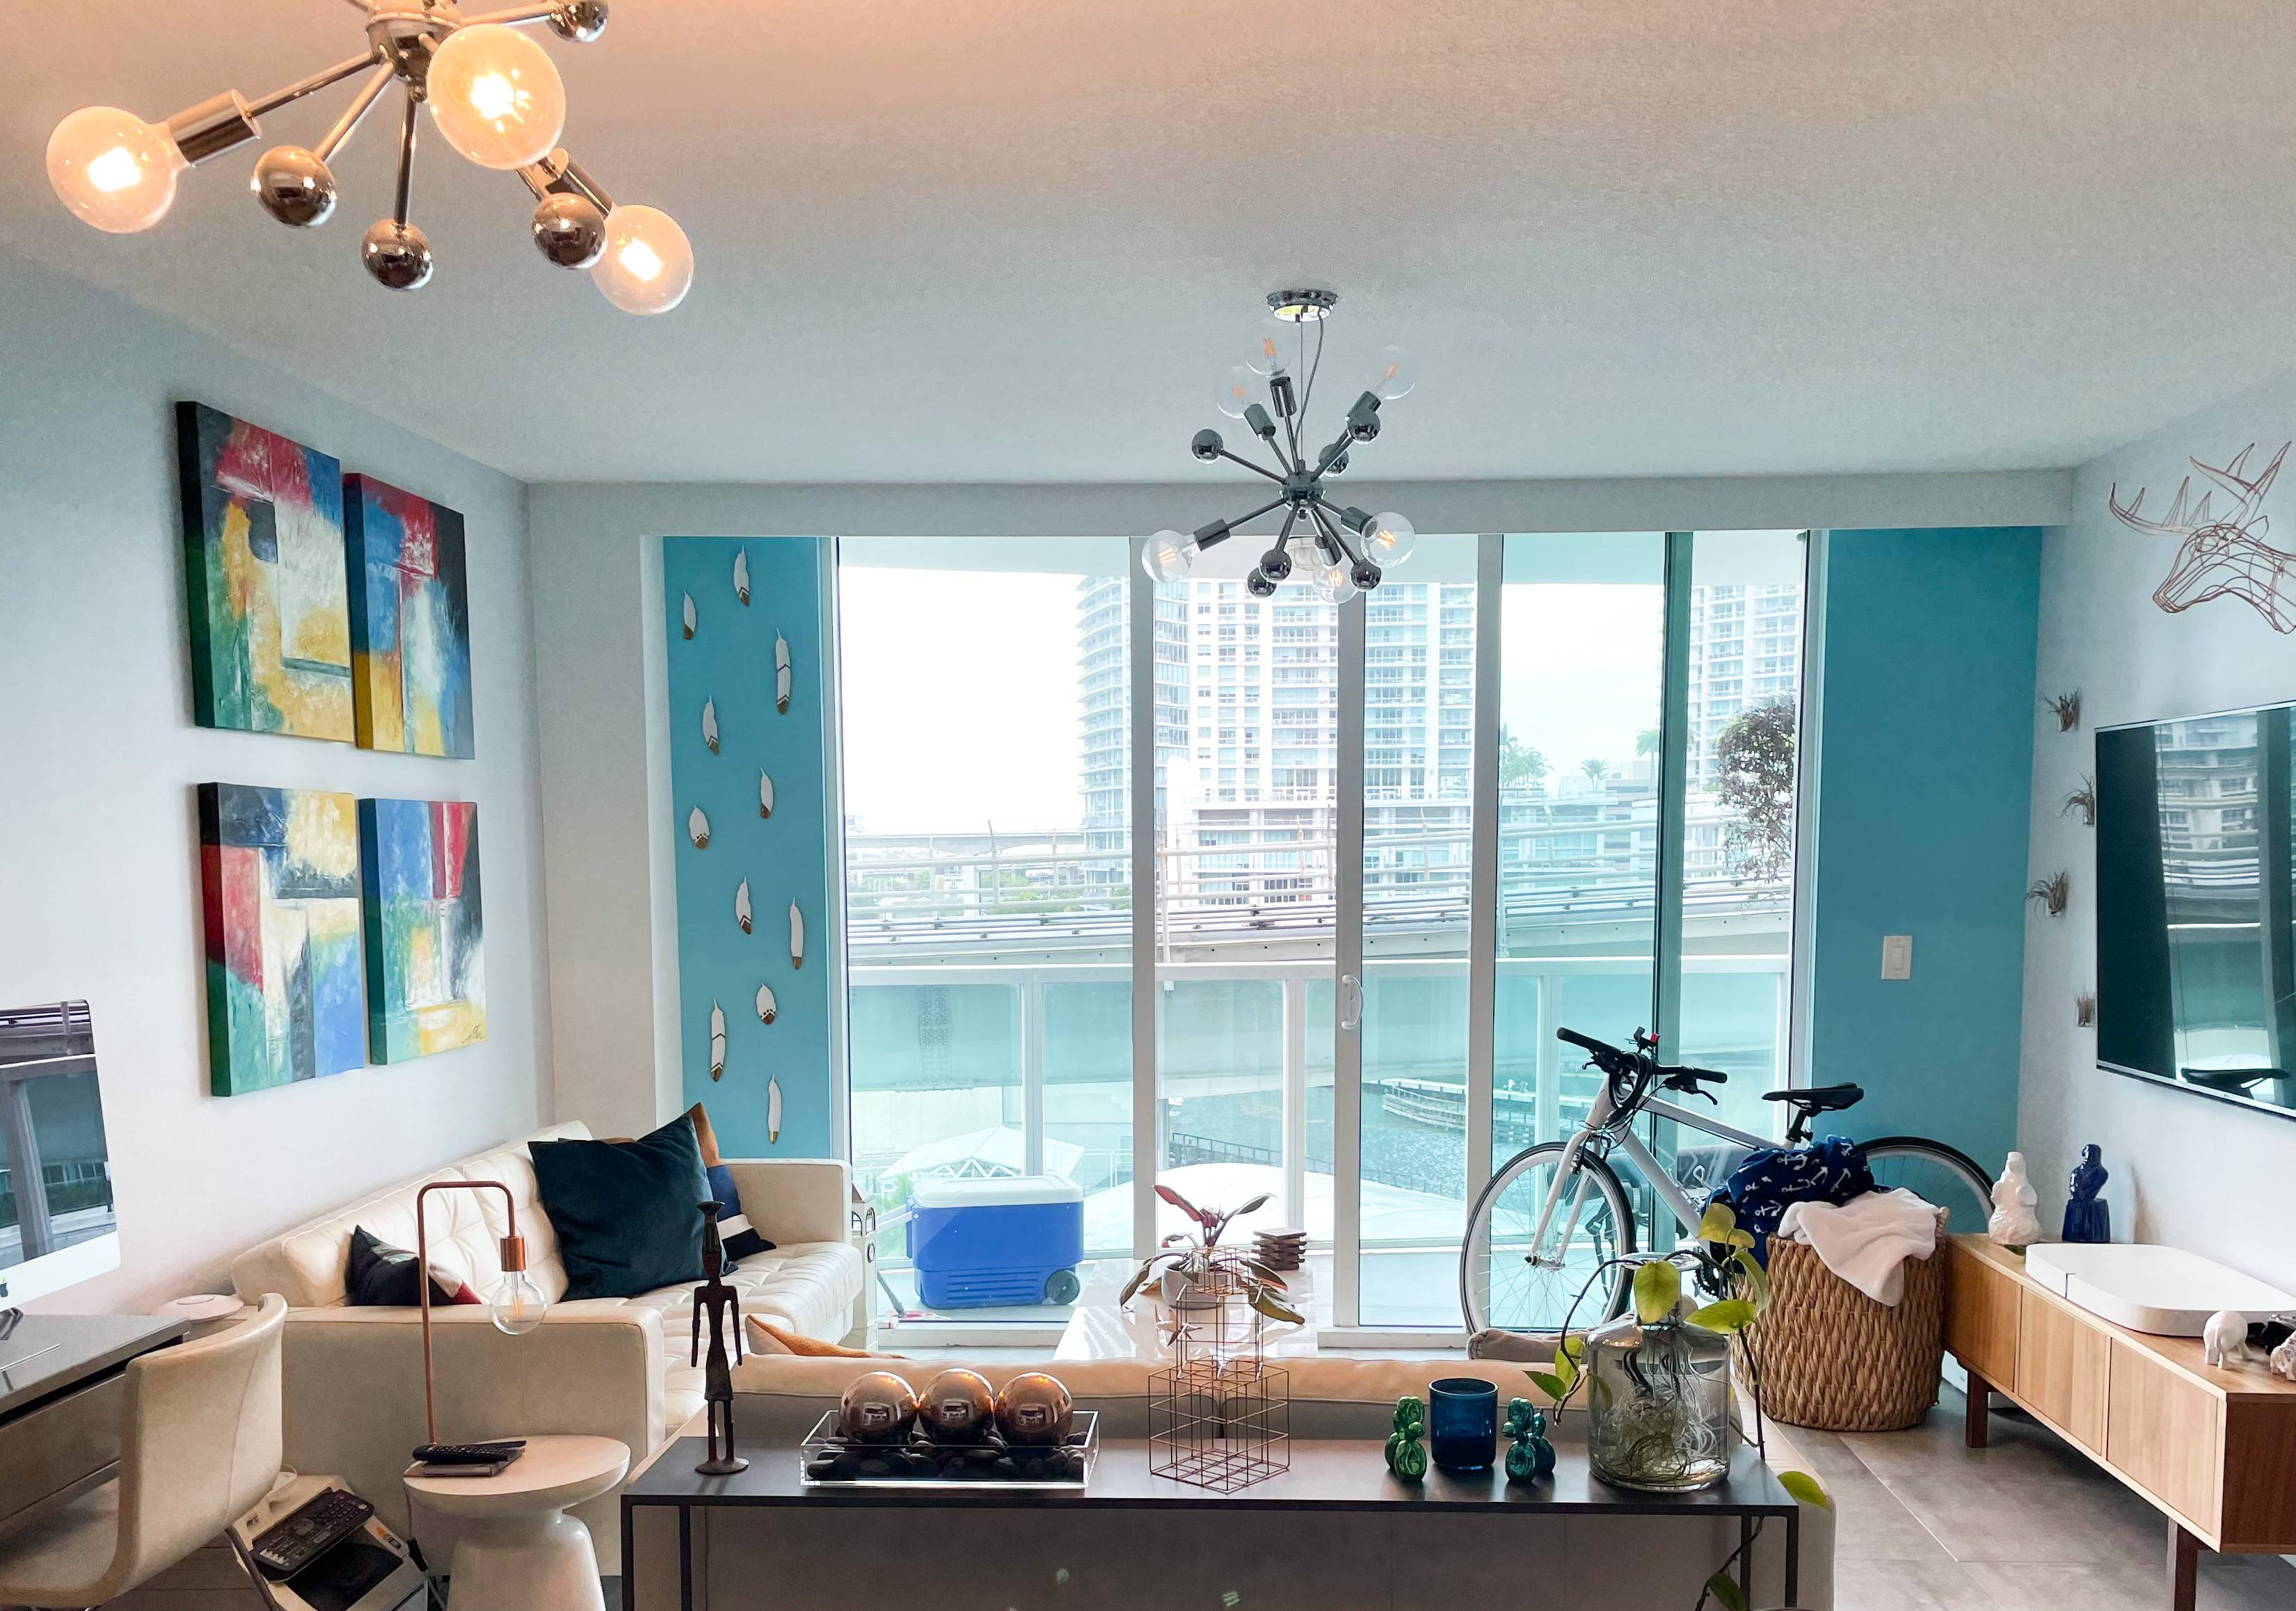 Brickell Miami Waterfront Condo for Rent |1-Bed, 1-Bath Unit with Water Views and a Walk In Closet